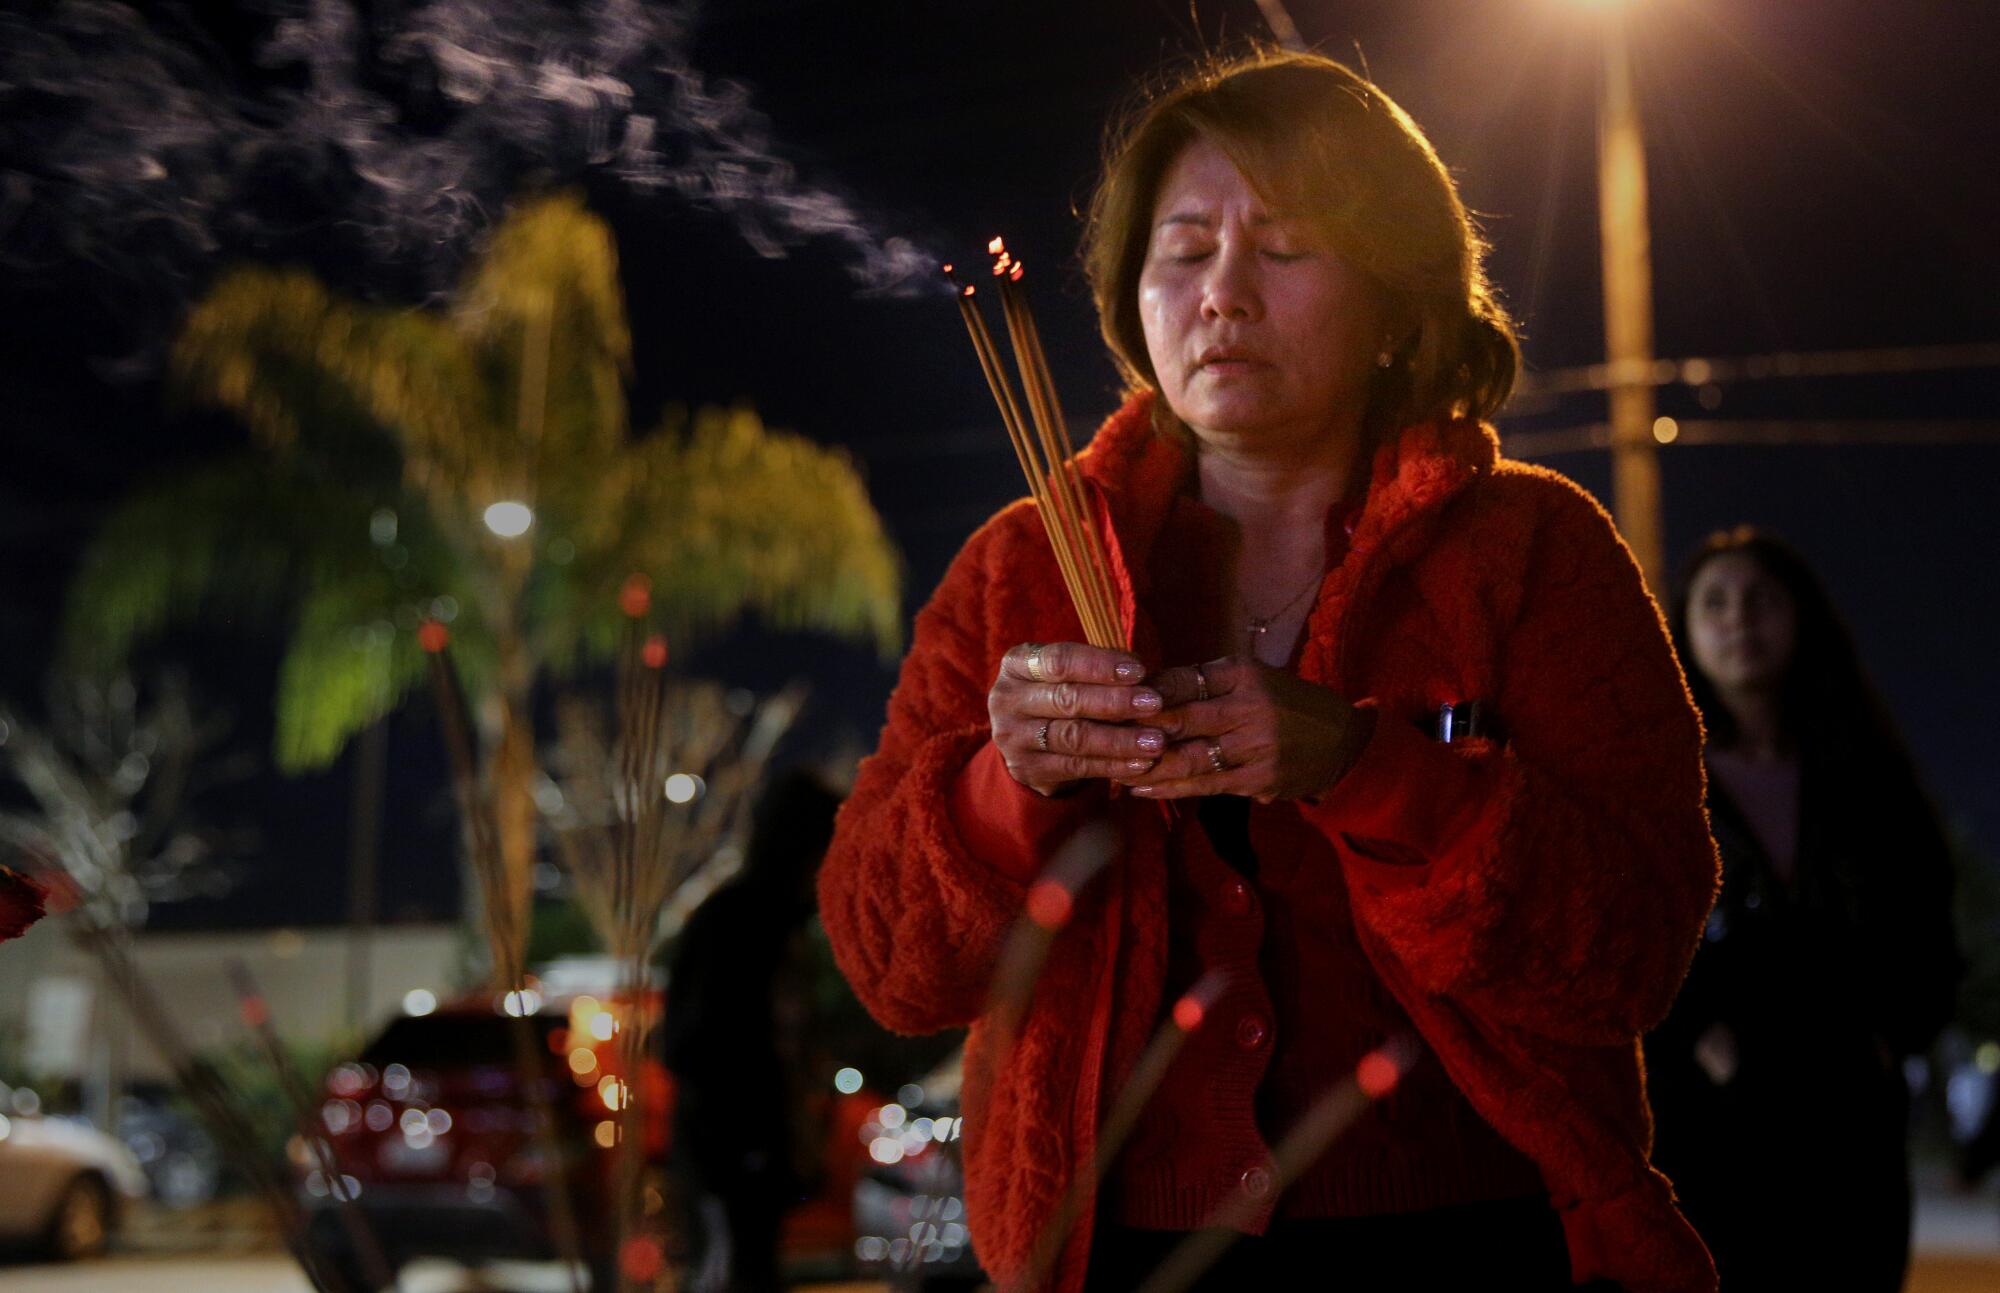 A woman holds incense sticks as she prays with her eye closed, standing outside